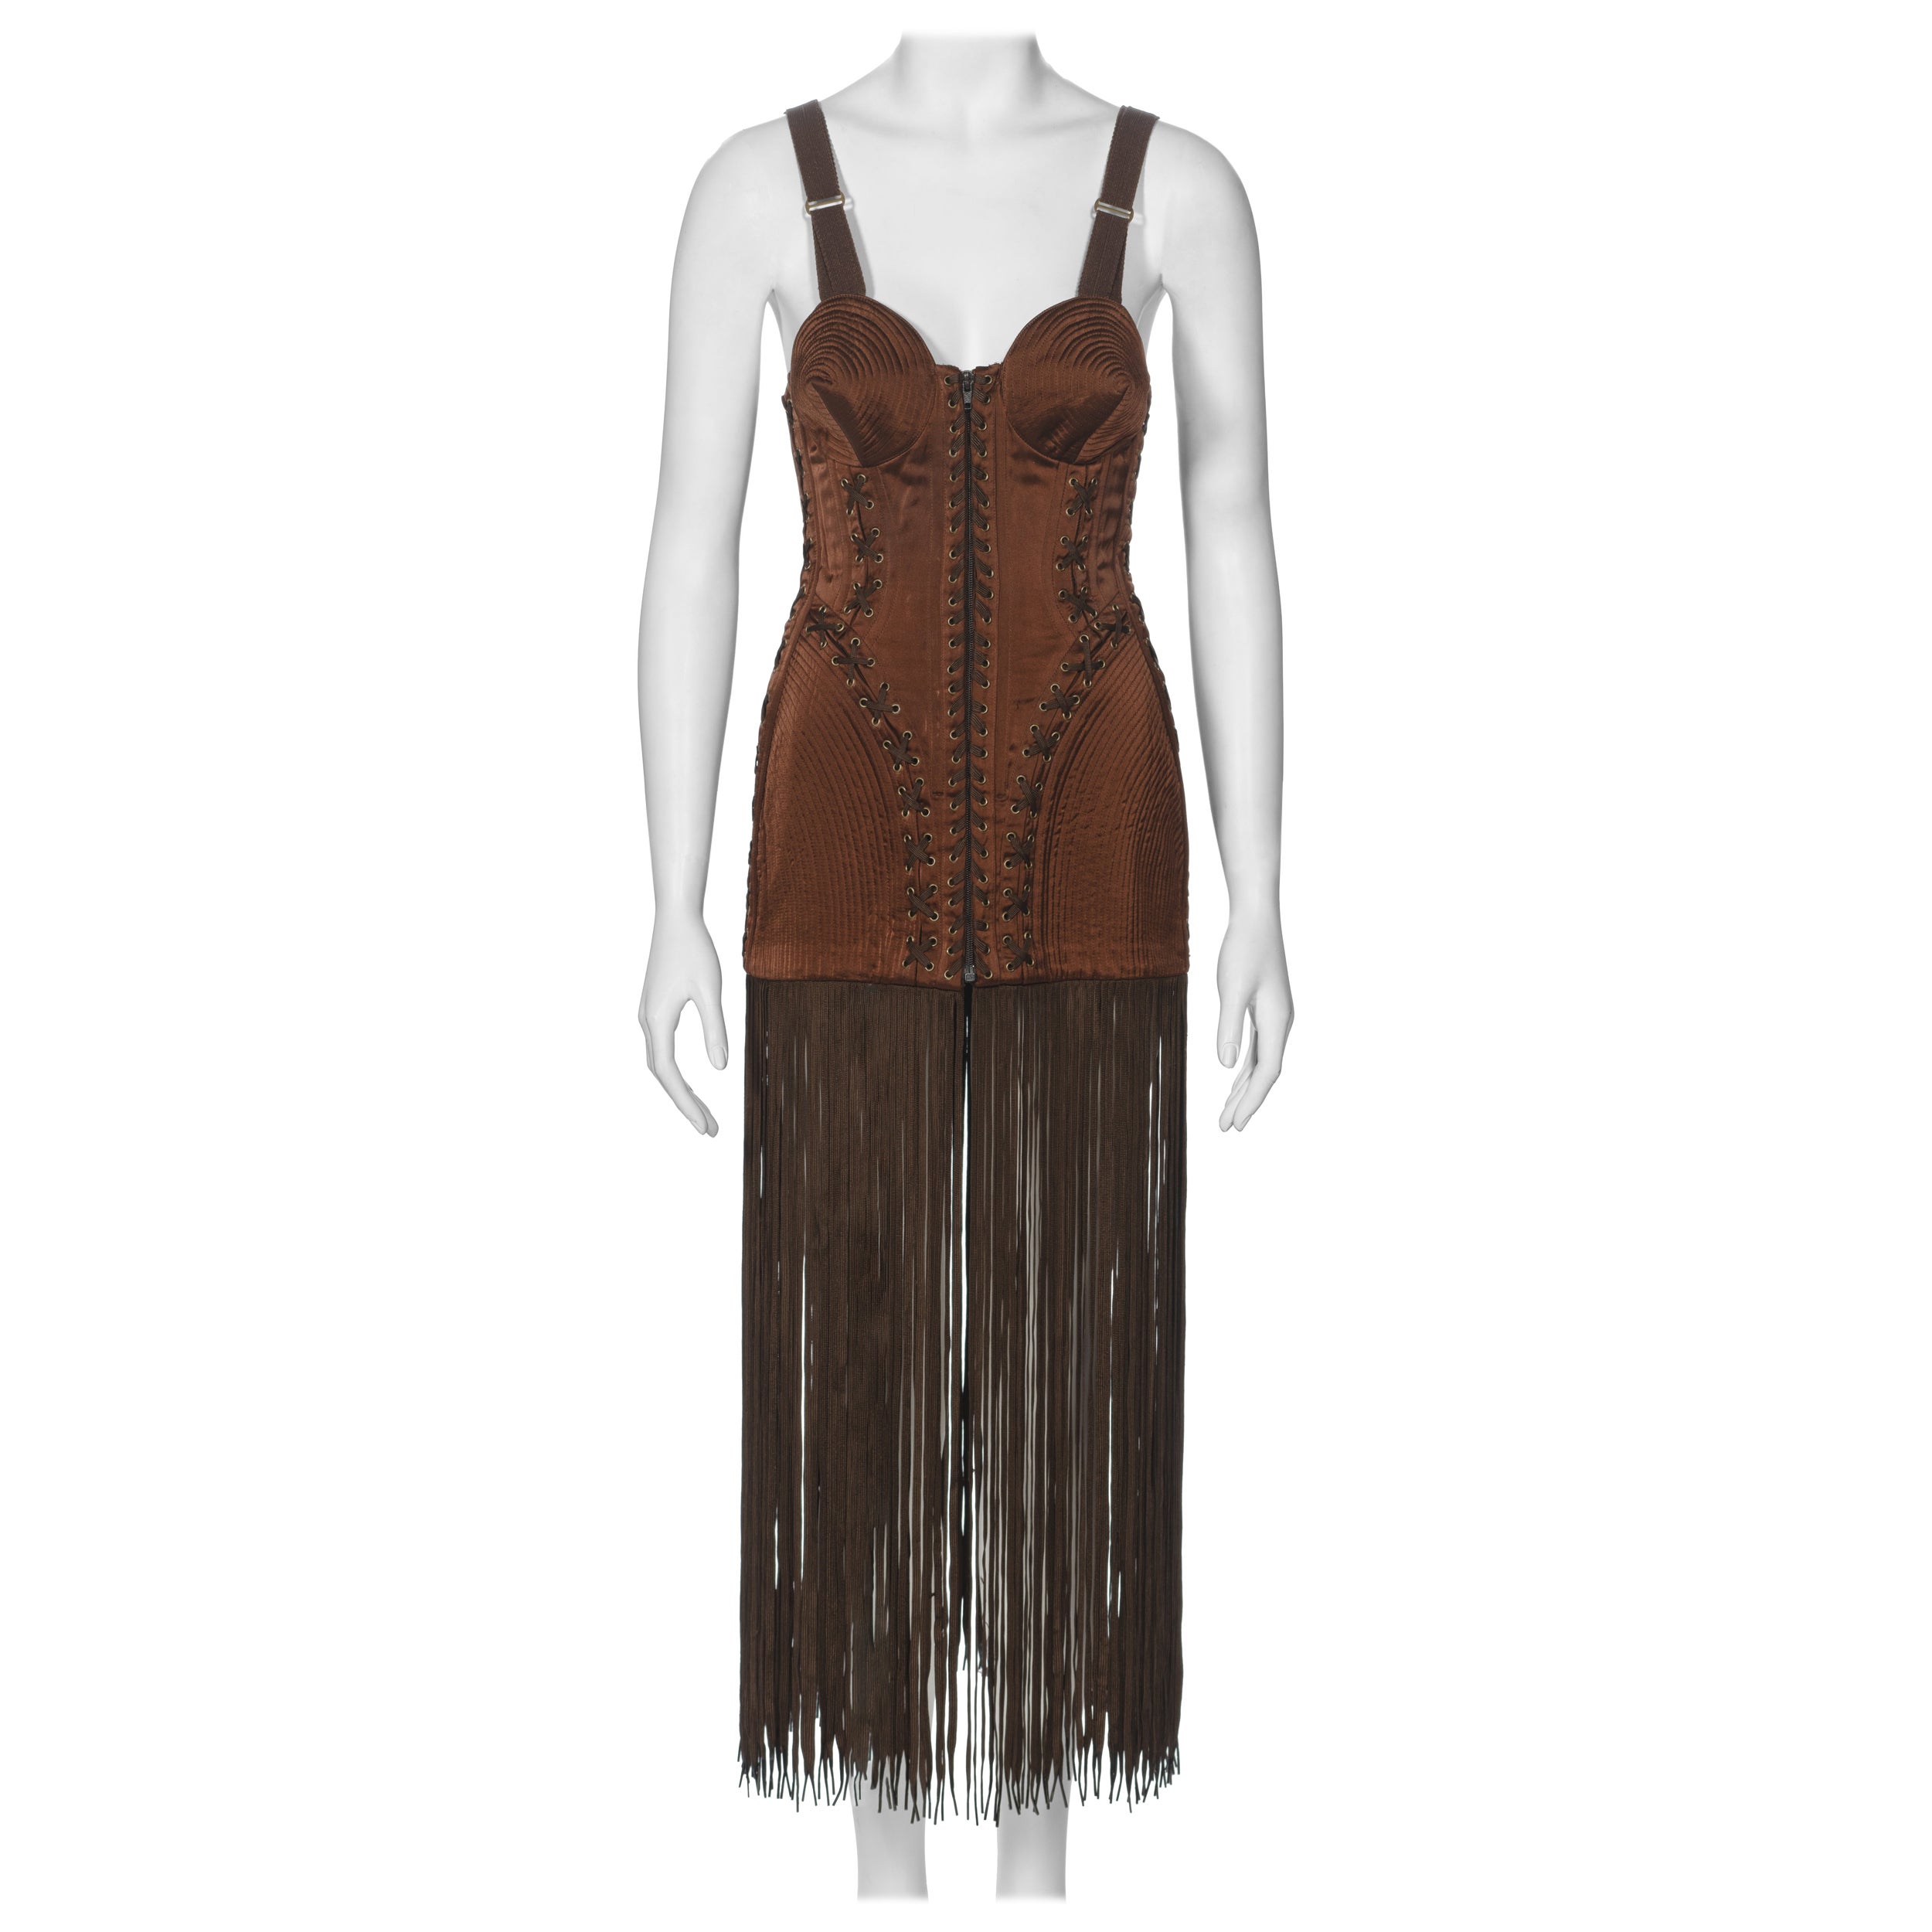 Jean Paul Gaultier Brown Corset Dress with Cone Bra and Fringed Hem, fw 1990 For Sale